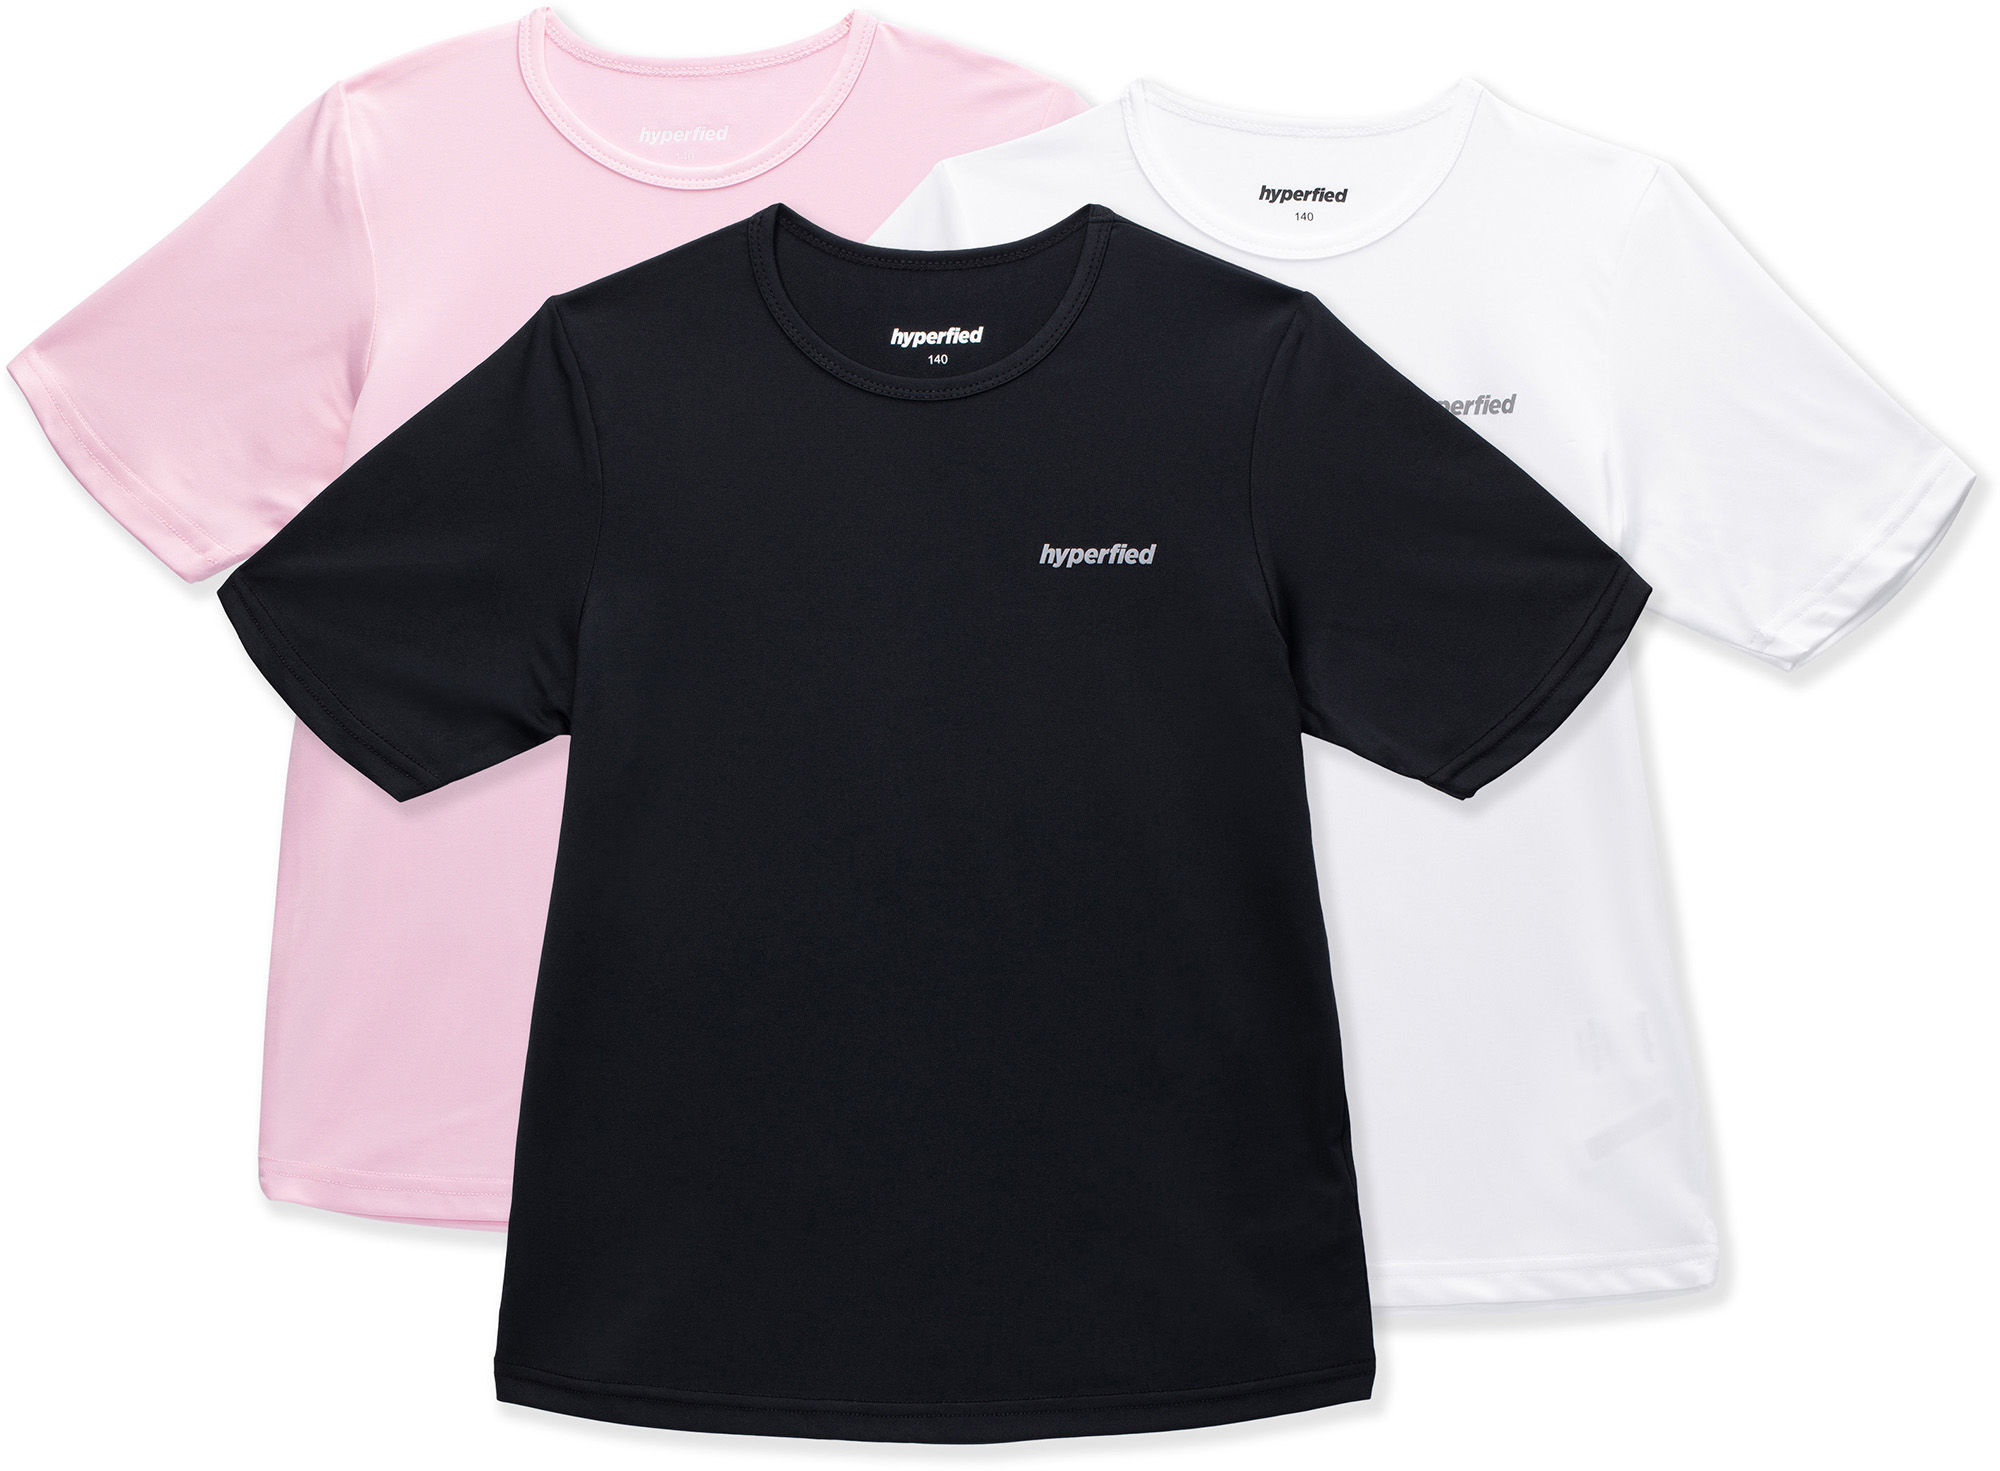 Hyperfied Wave T-Shirt 3-pack Black/White/Fairy Tale 150